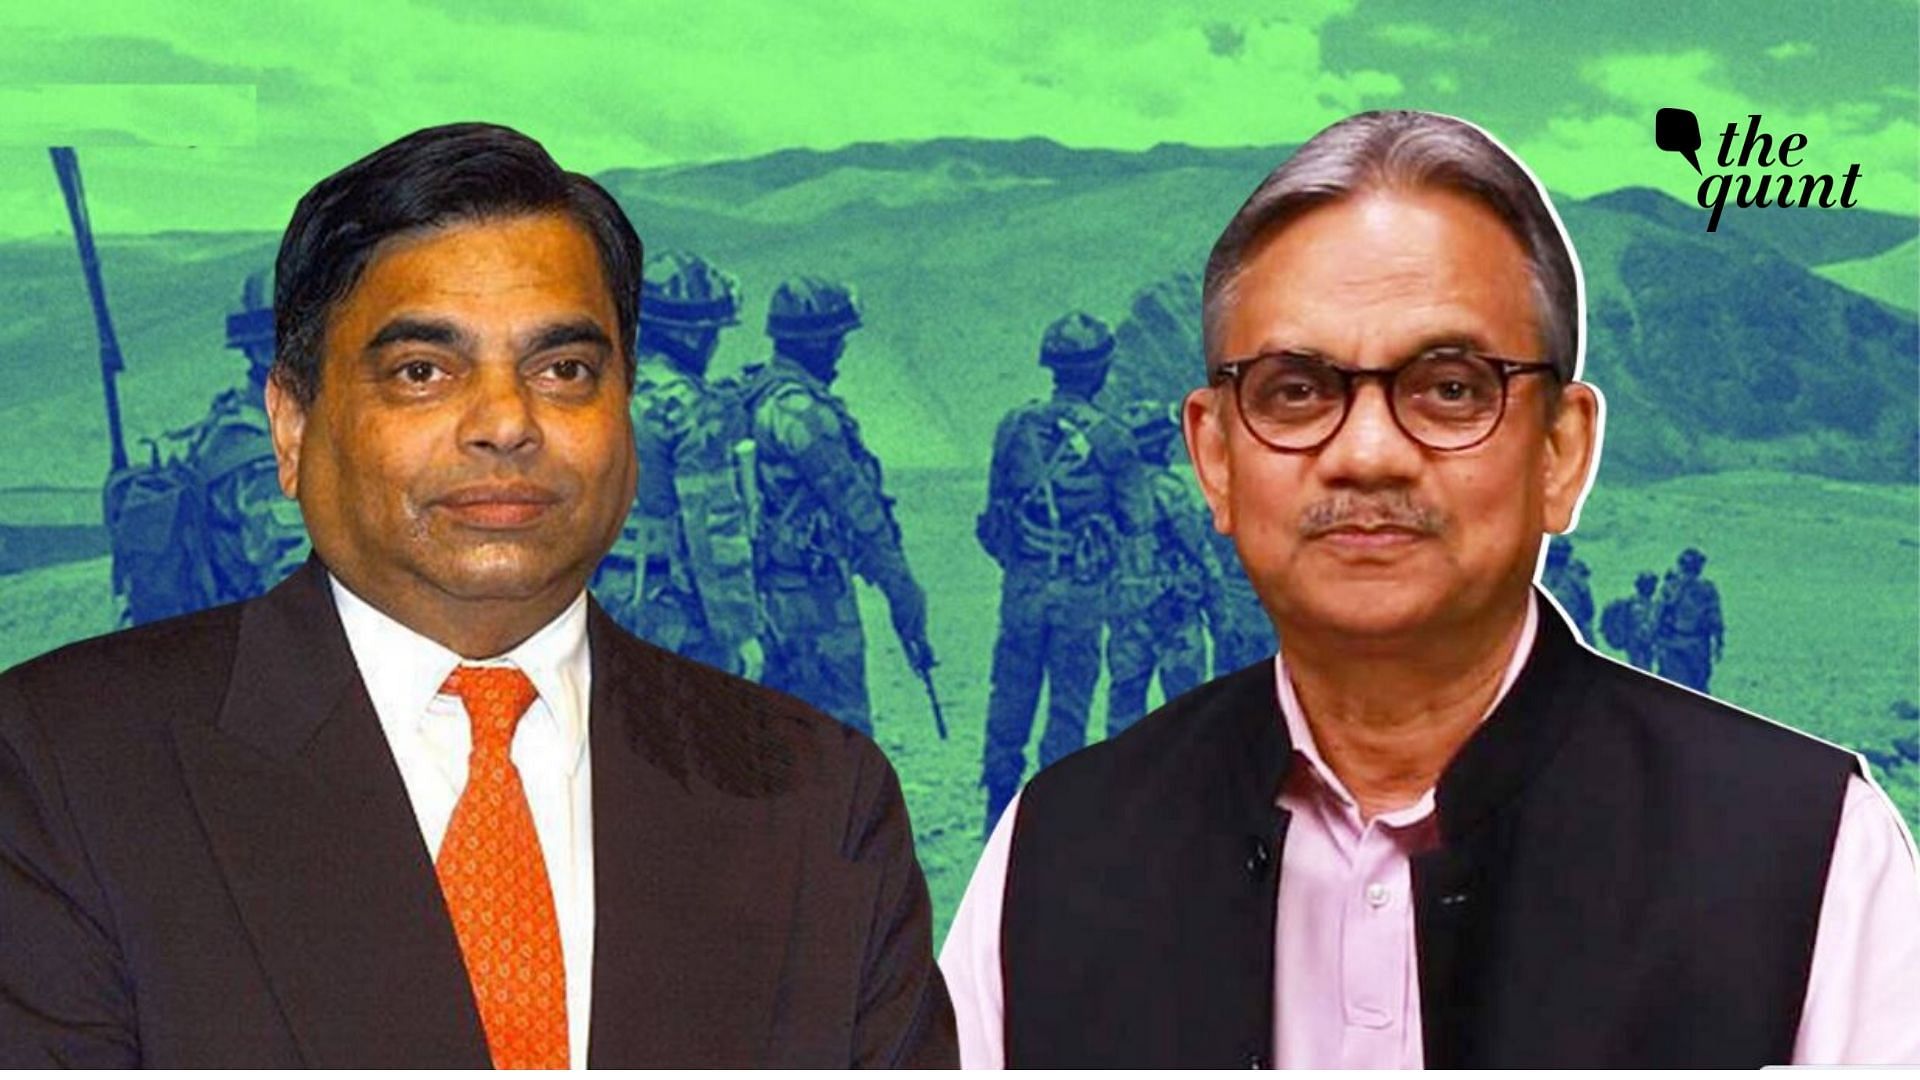 Former Diplomat and China Affairs Expert, TCA Rangachari spoke with The Quint‘s Editorial Director Sanjay Pugalia on the violent clashes at Galwan valley in Ladakh that killed at least 20 Indian soldiers.